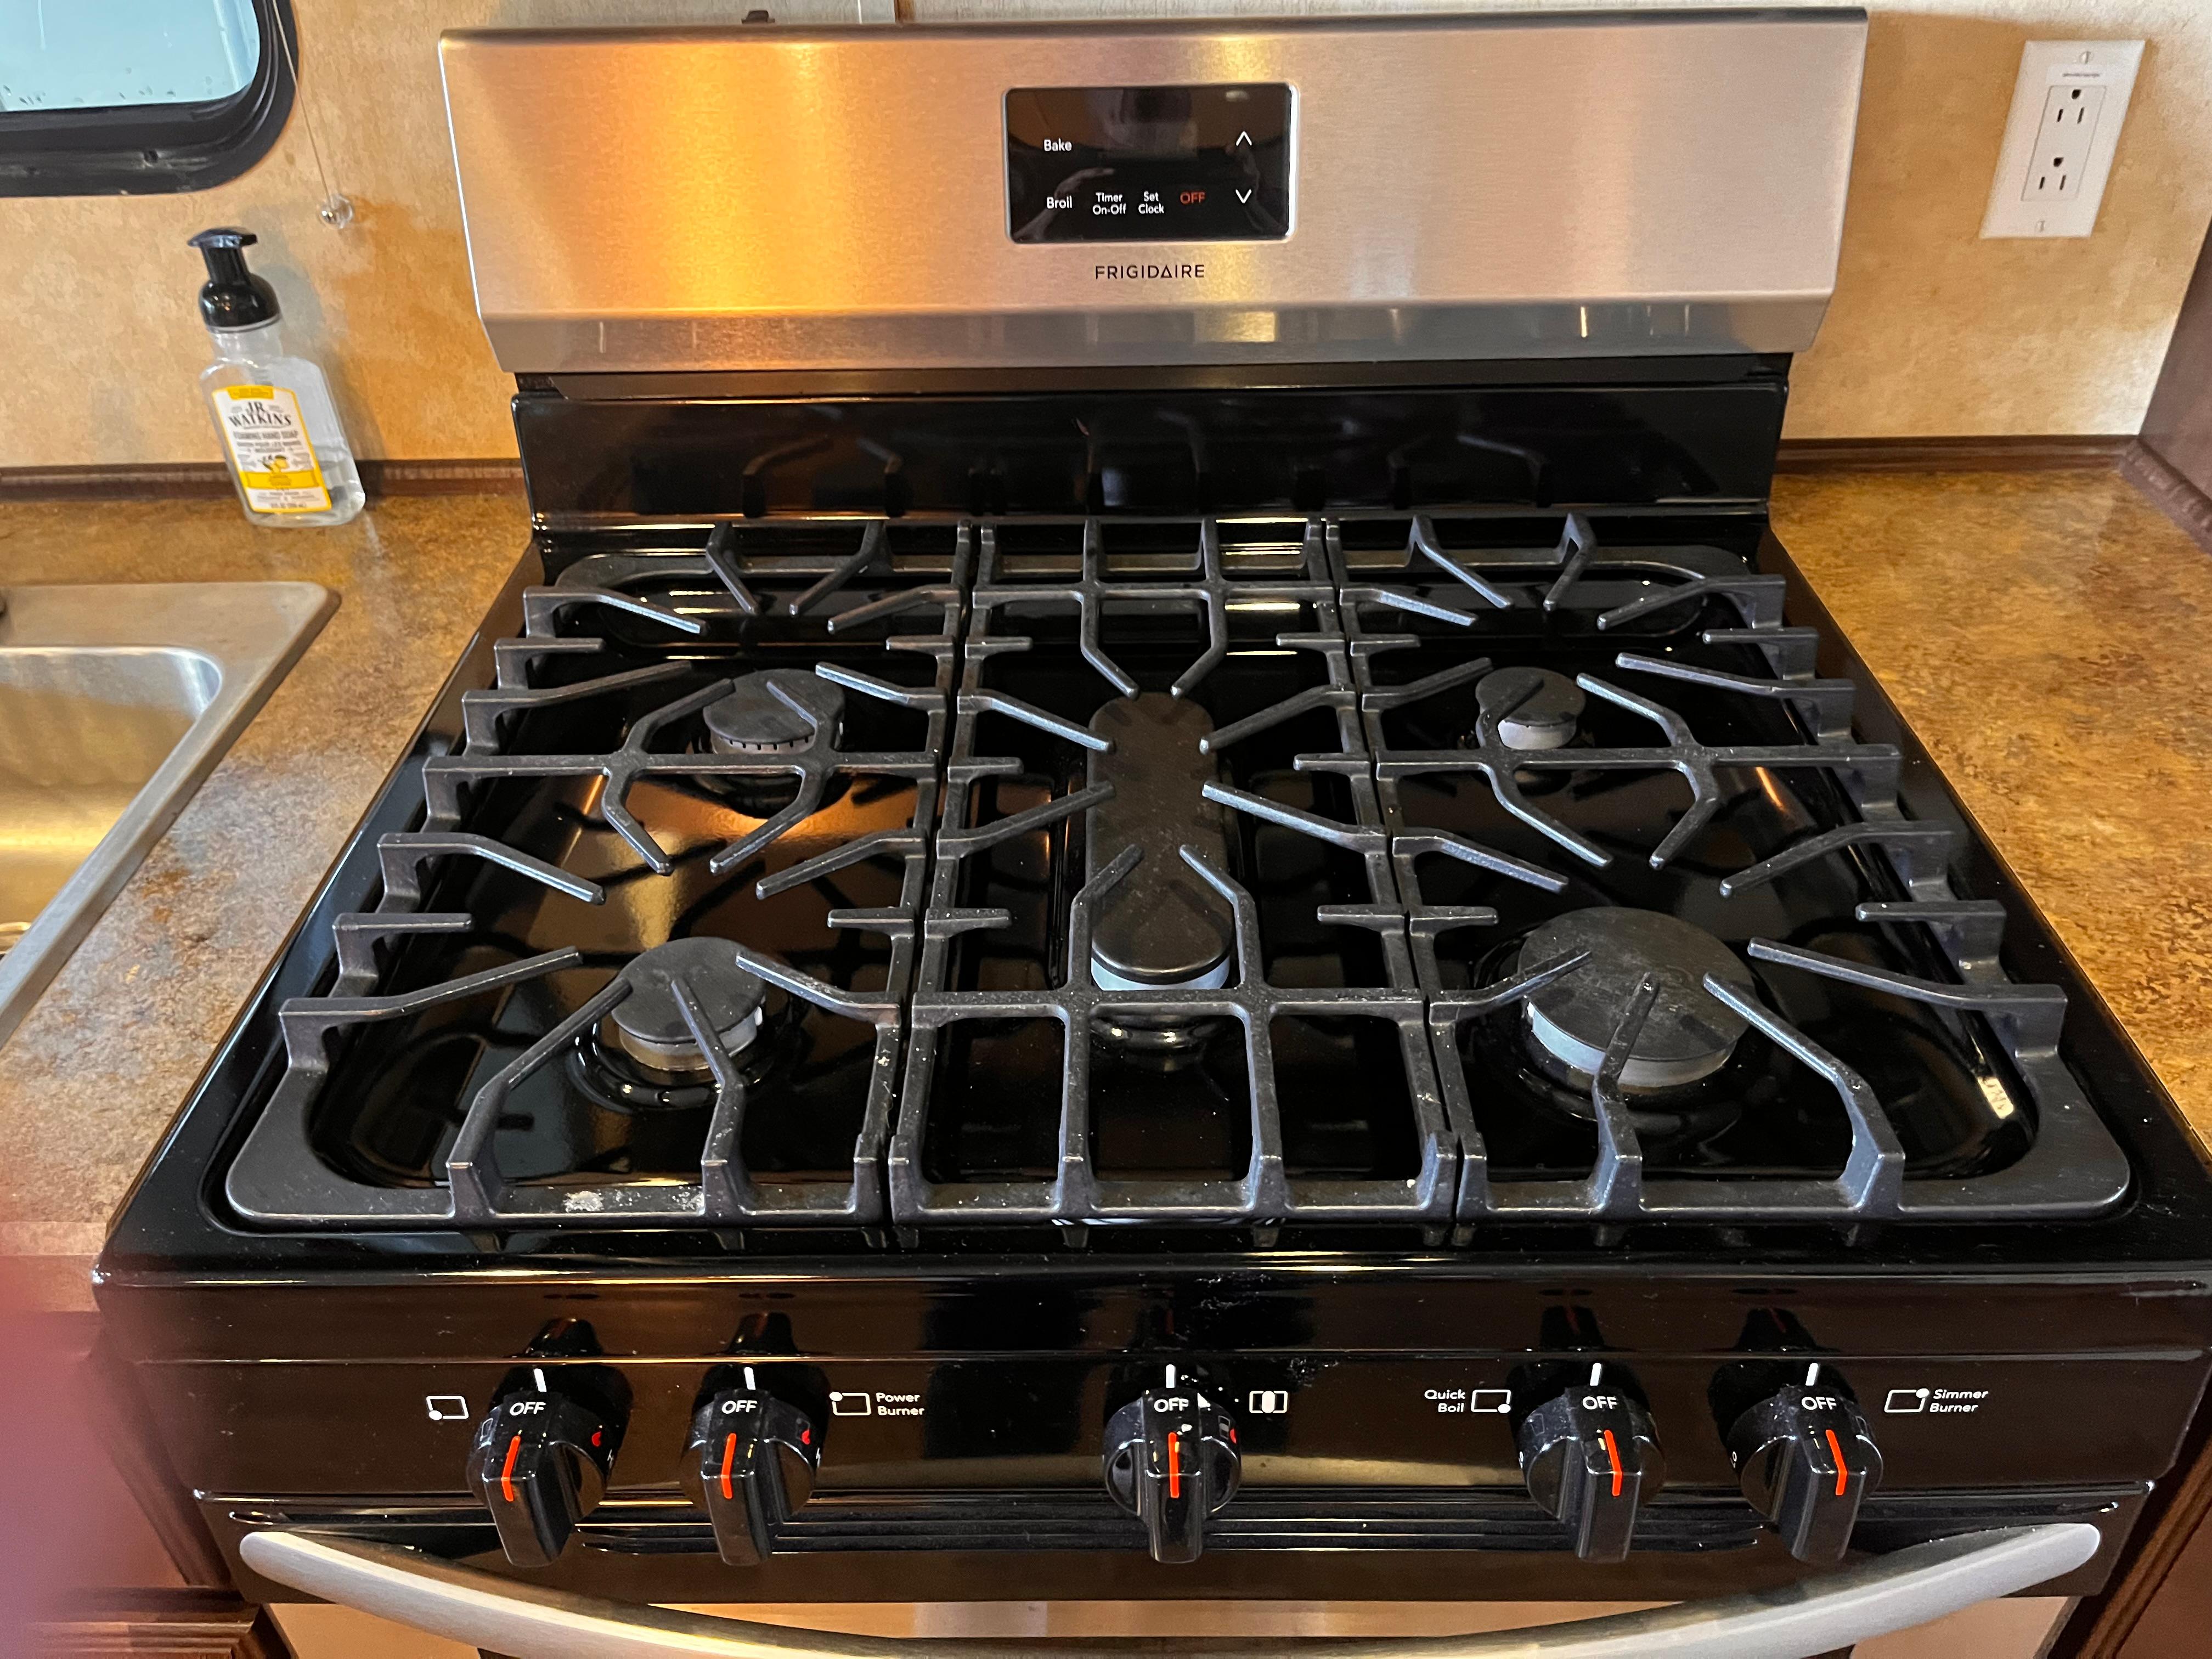 Propane Stove with oven